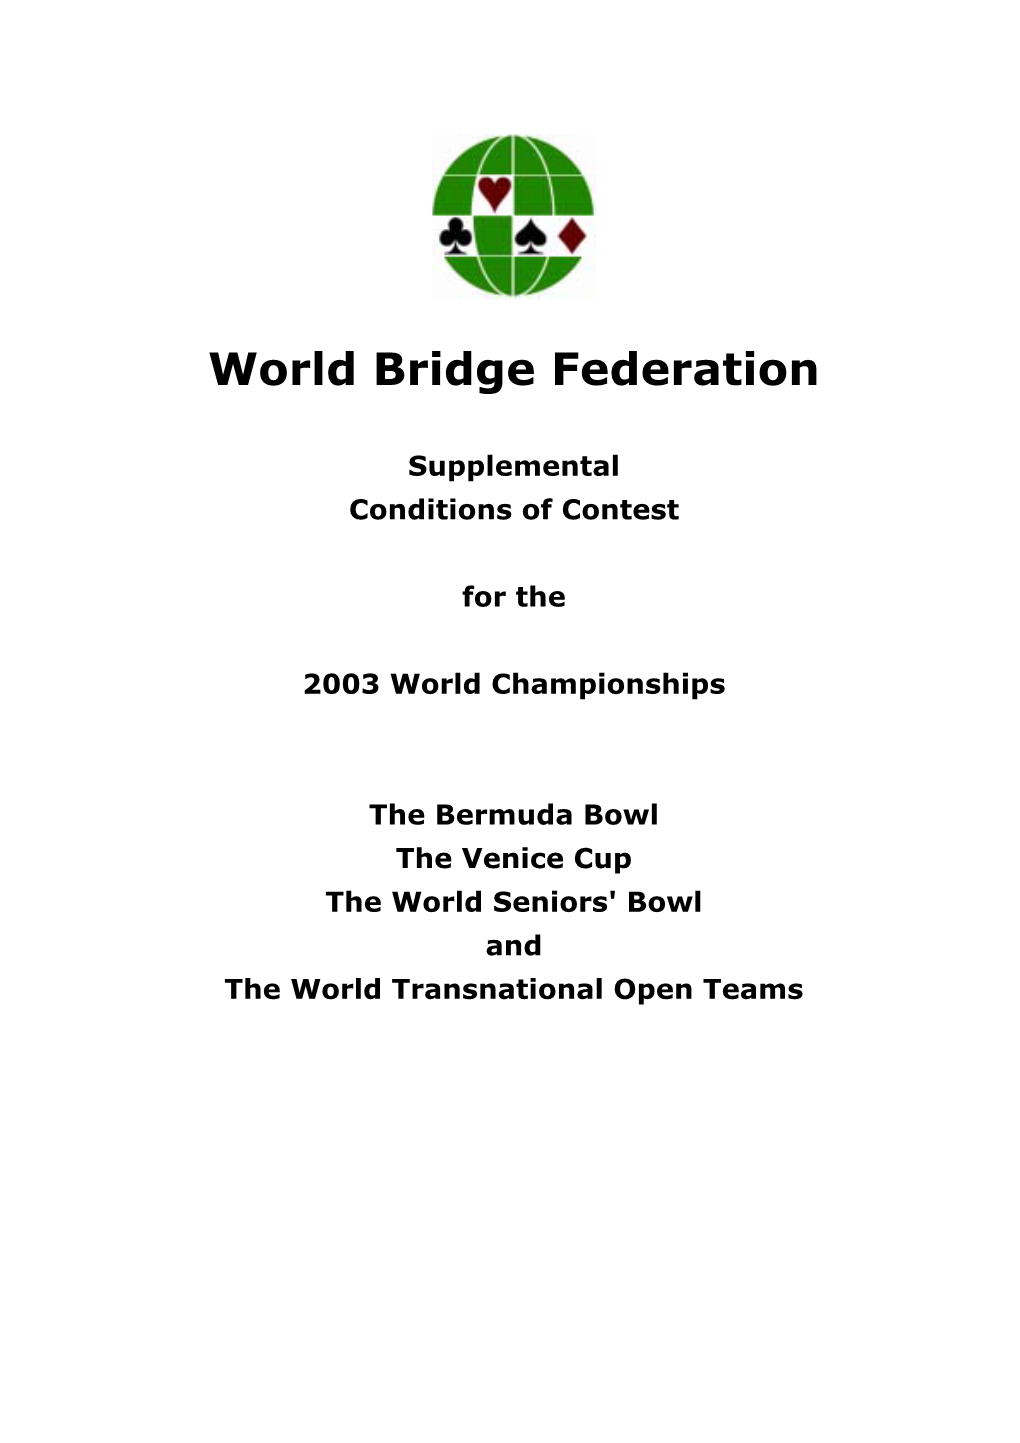 Supplemental Conditions of Contest for the 2003 World Championships